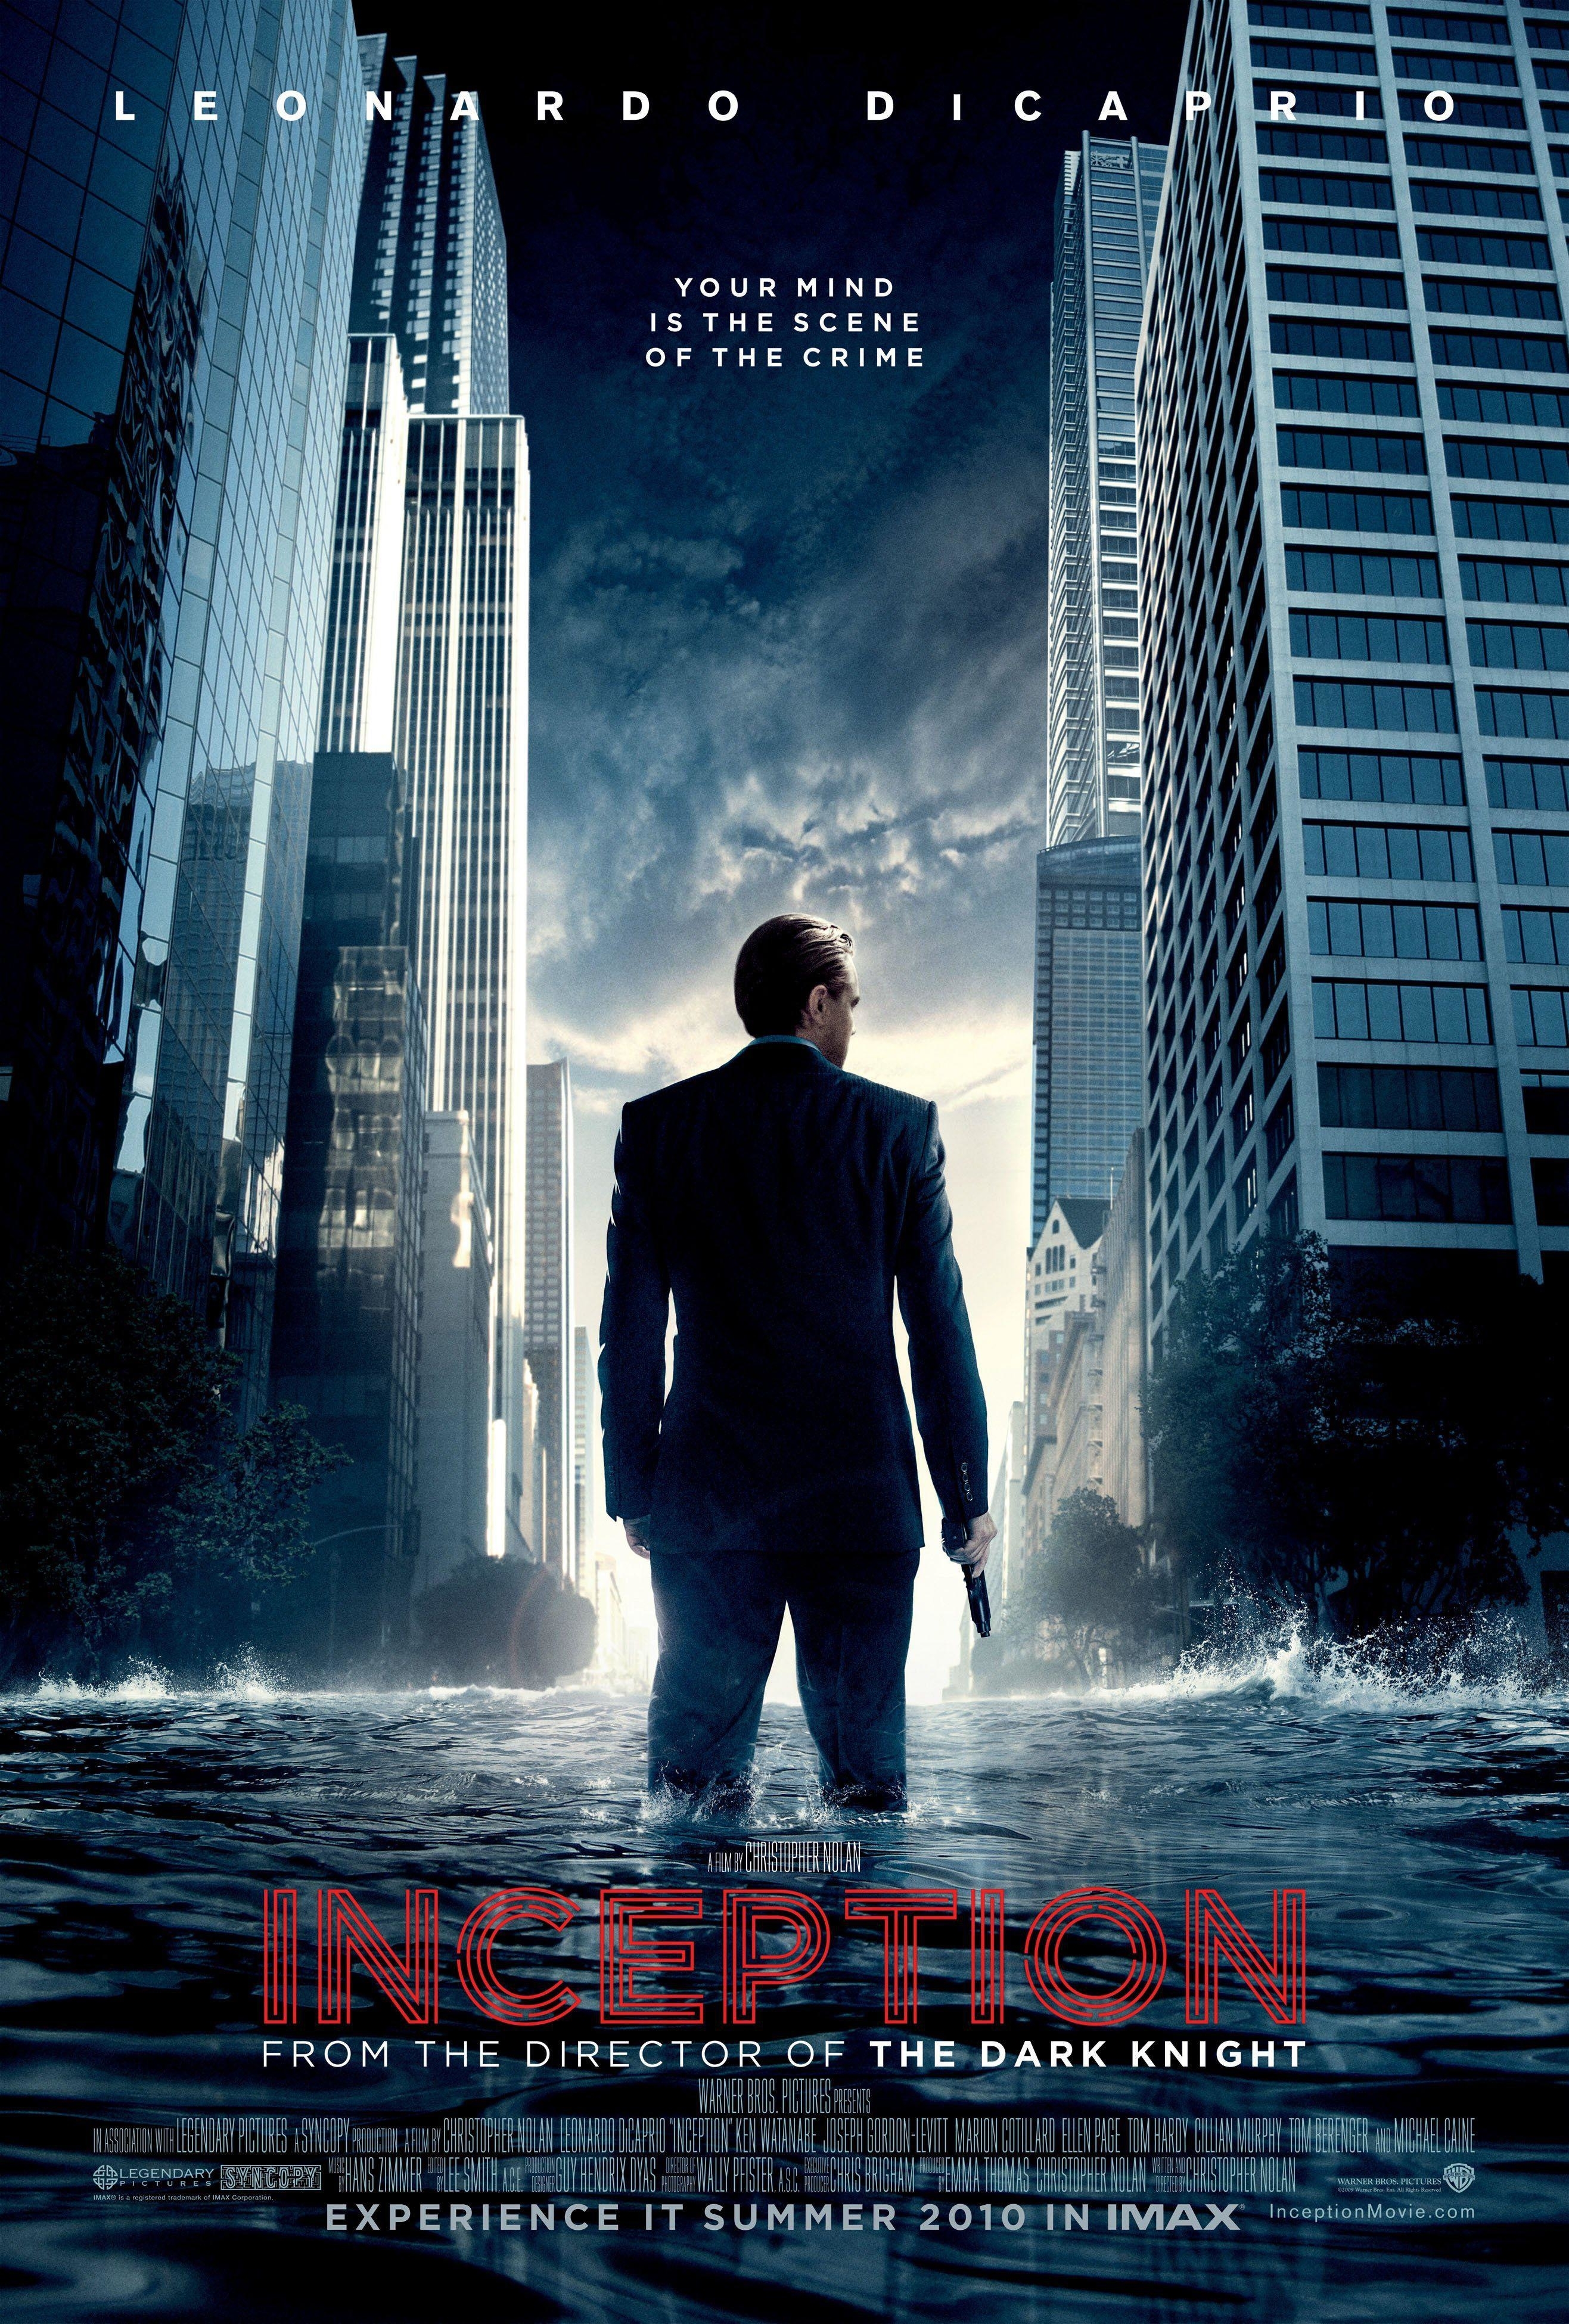 Leonardo DiCaprio stands alone with his back to us on the center of the Inception movie poster.